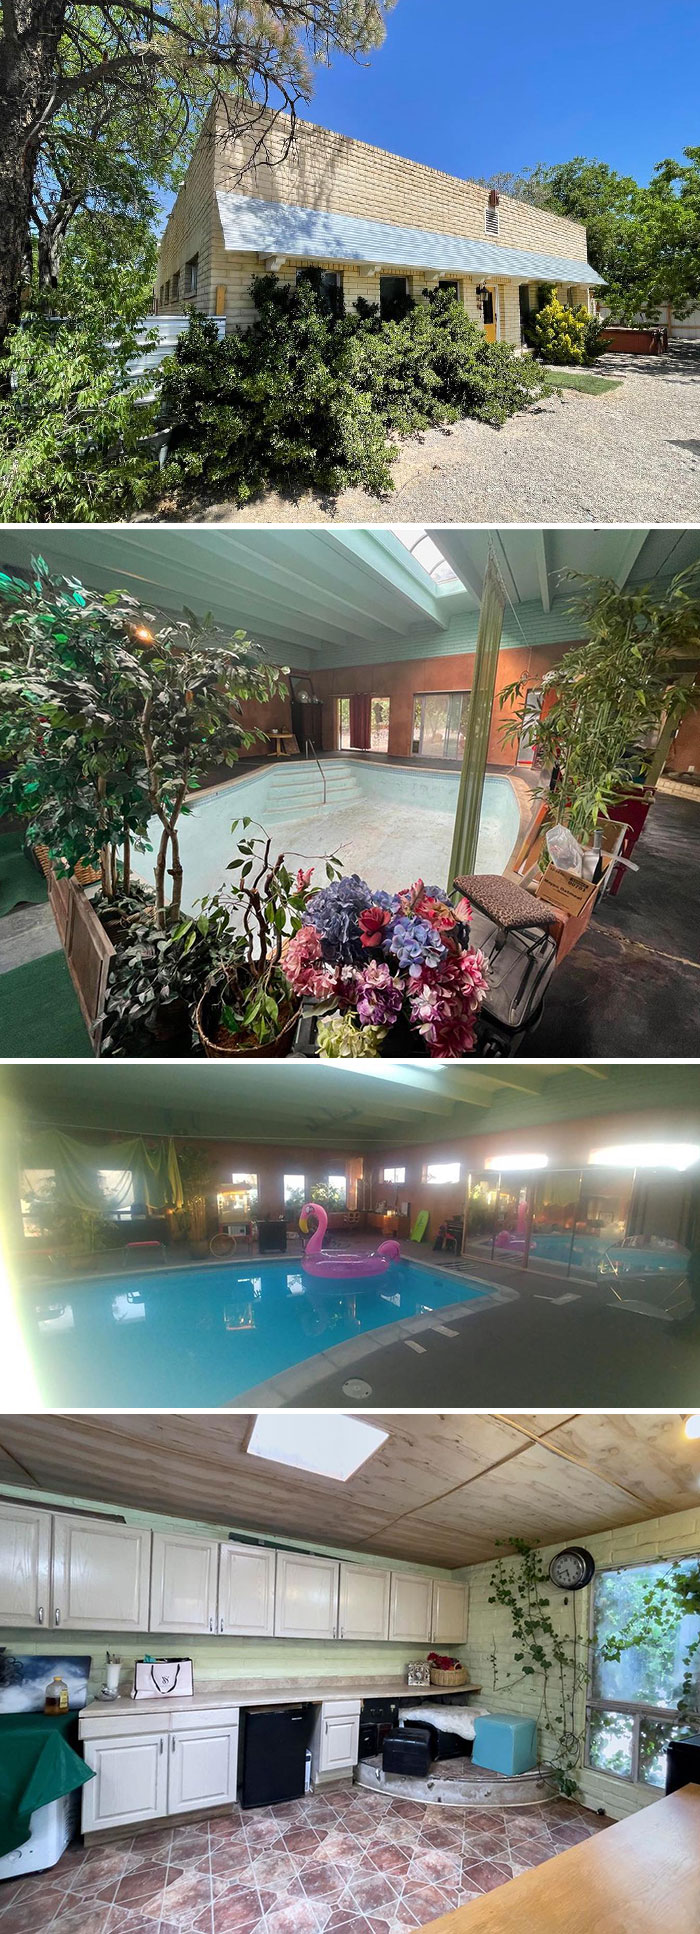 This One Bedroom, One Bathroom House In Rio Rancho Nm Is All Pool